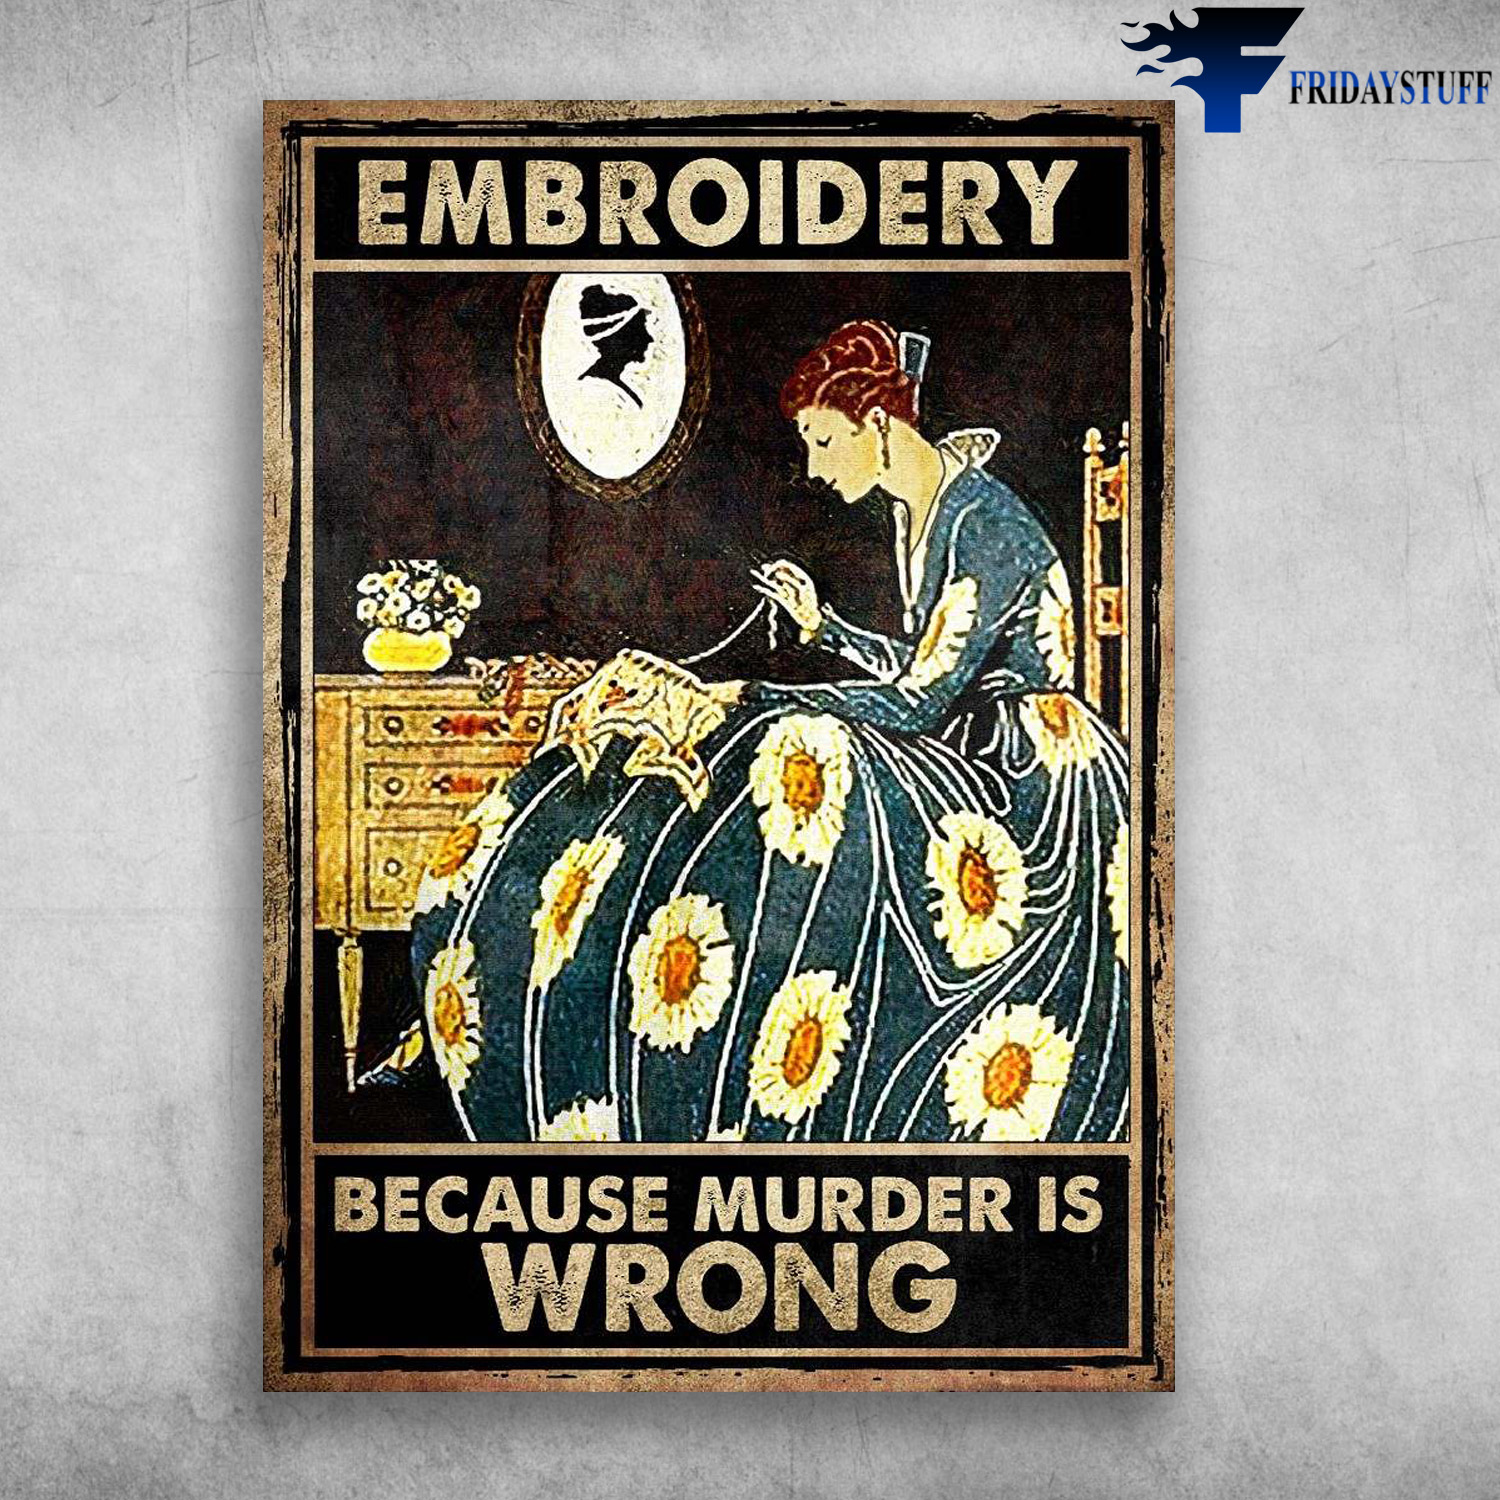 Lady Embroidery, Embroidering Girl - Embroidery Because Murder Is Wrong